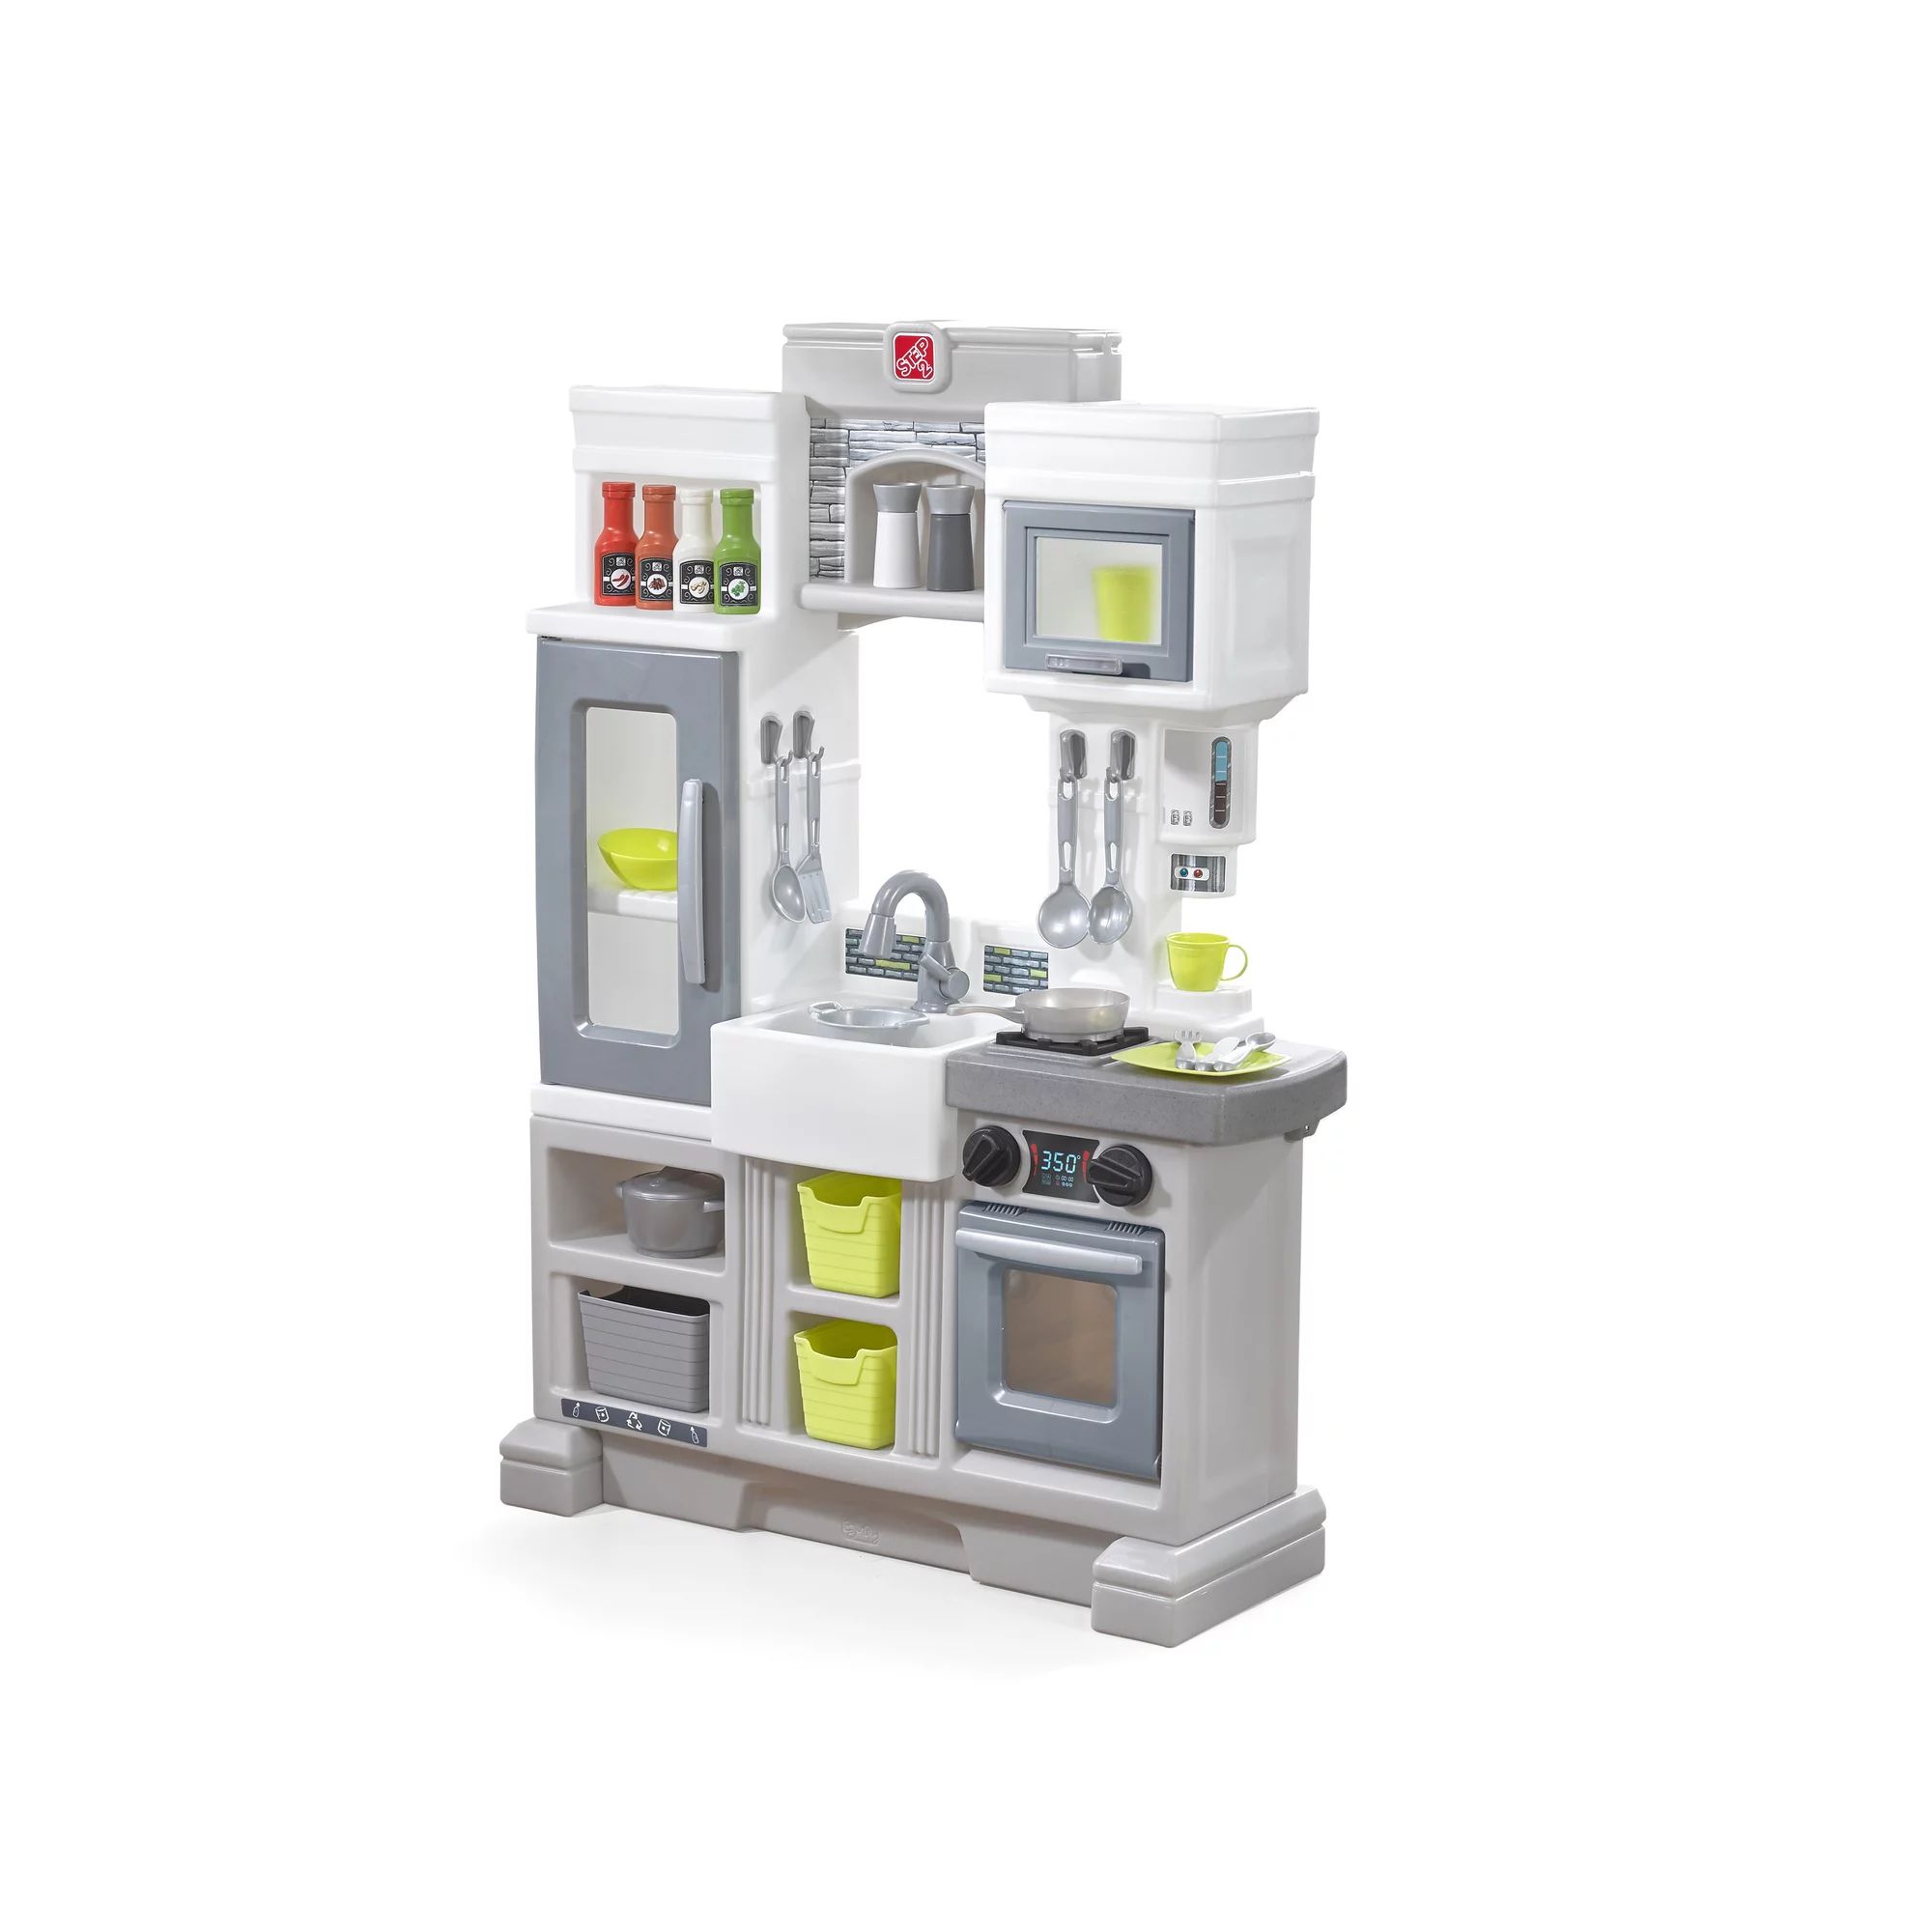 Step2 Downtown Delights Play Kitchen with 24 Piece Accessory Play Set | Walmart (US)